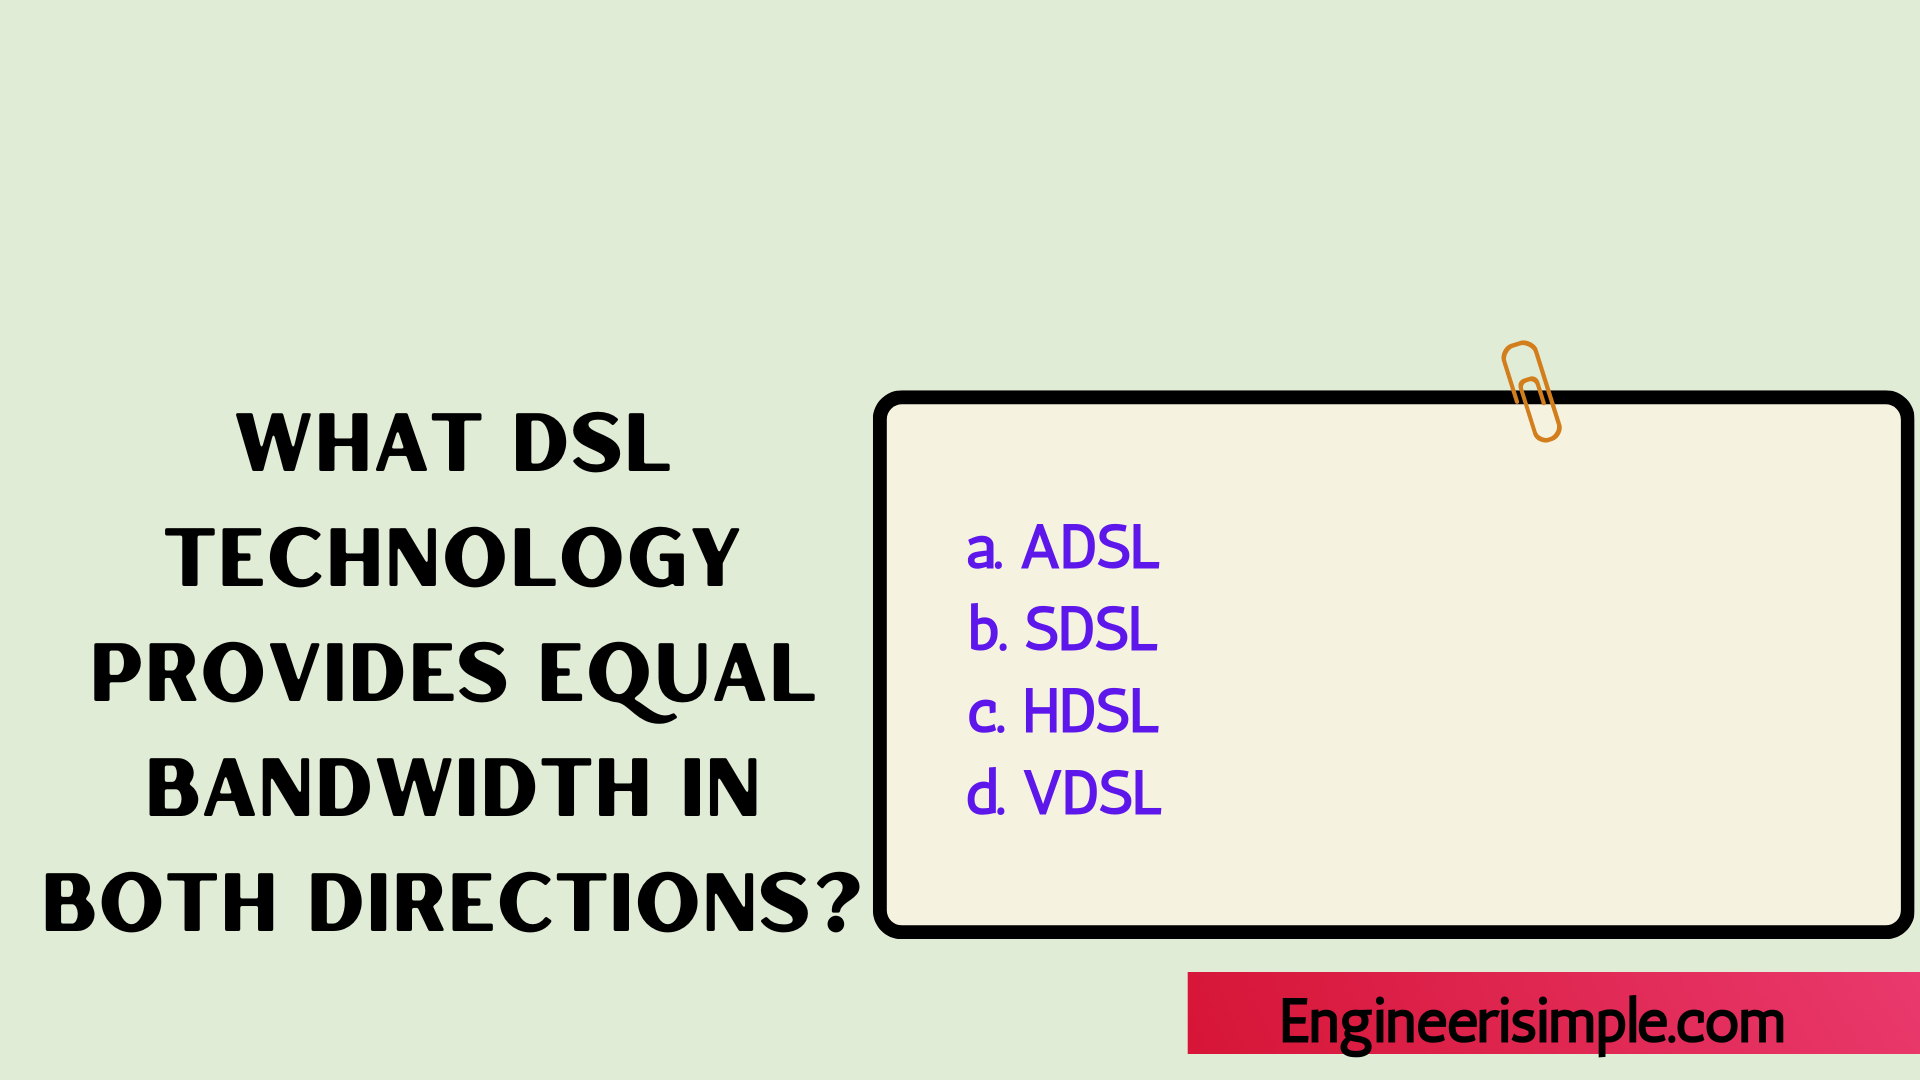 What DSL Technology Provides Equal Bandwidth in both Directions?